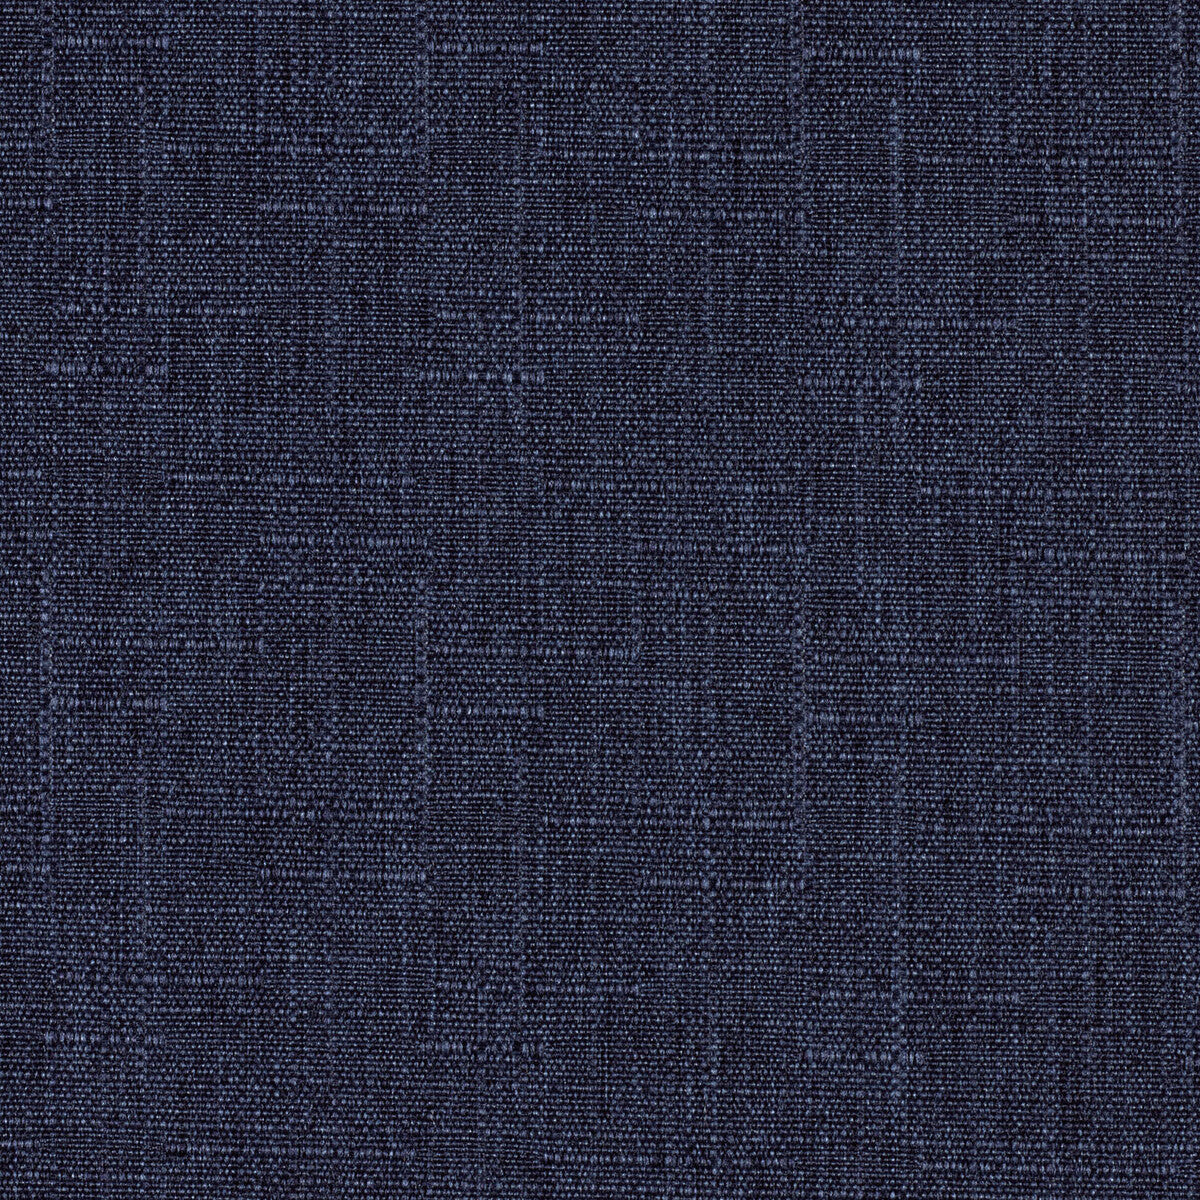 Kravet Contract fabric in 4321-50 color - pattern 4321.50.0 - by Kravet Contract